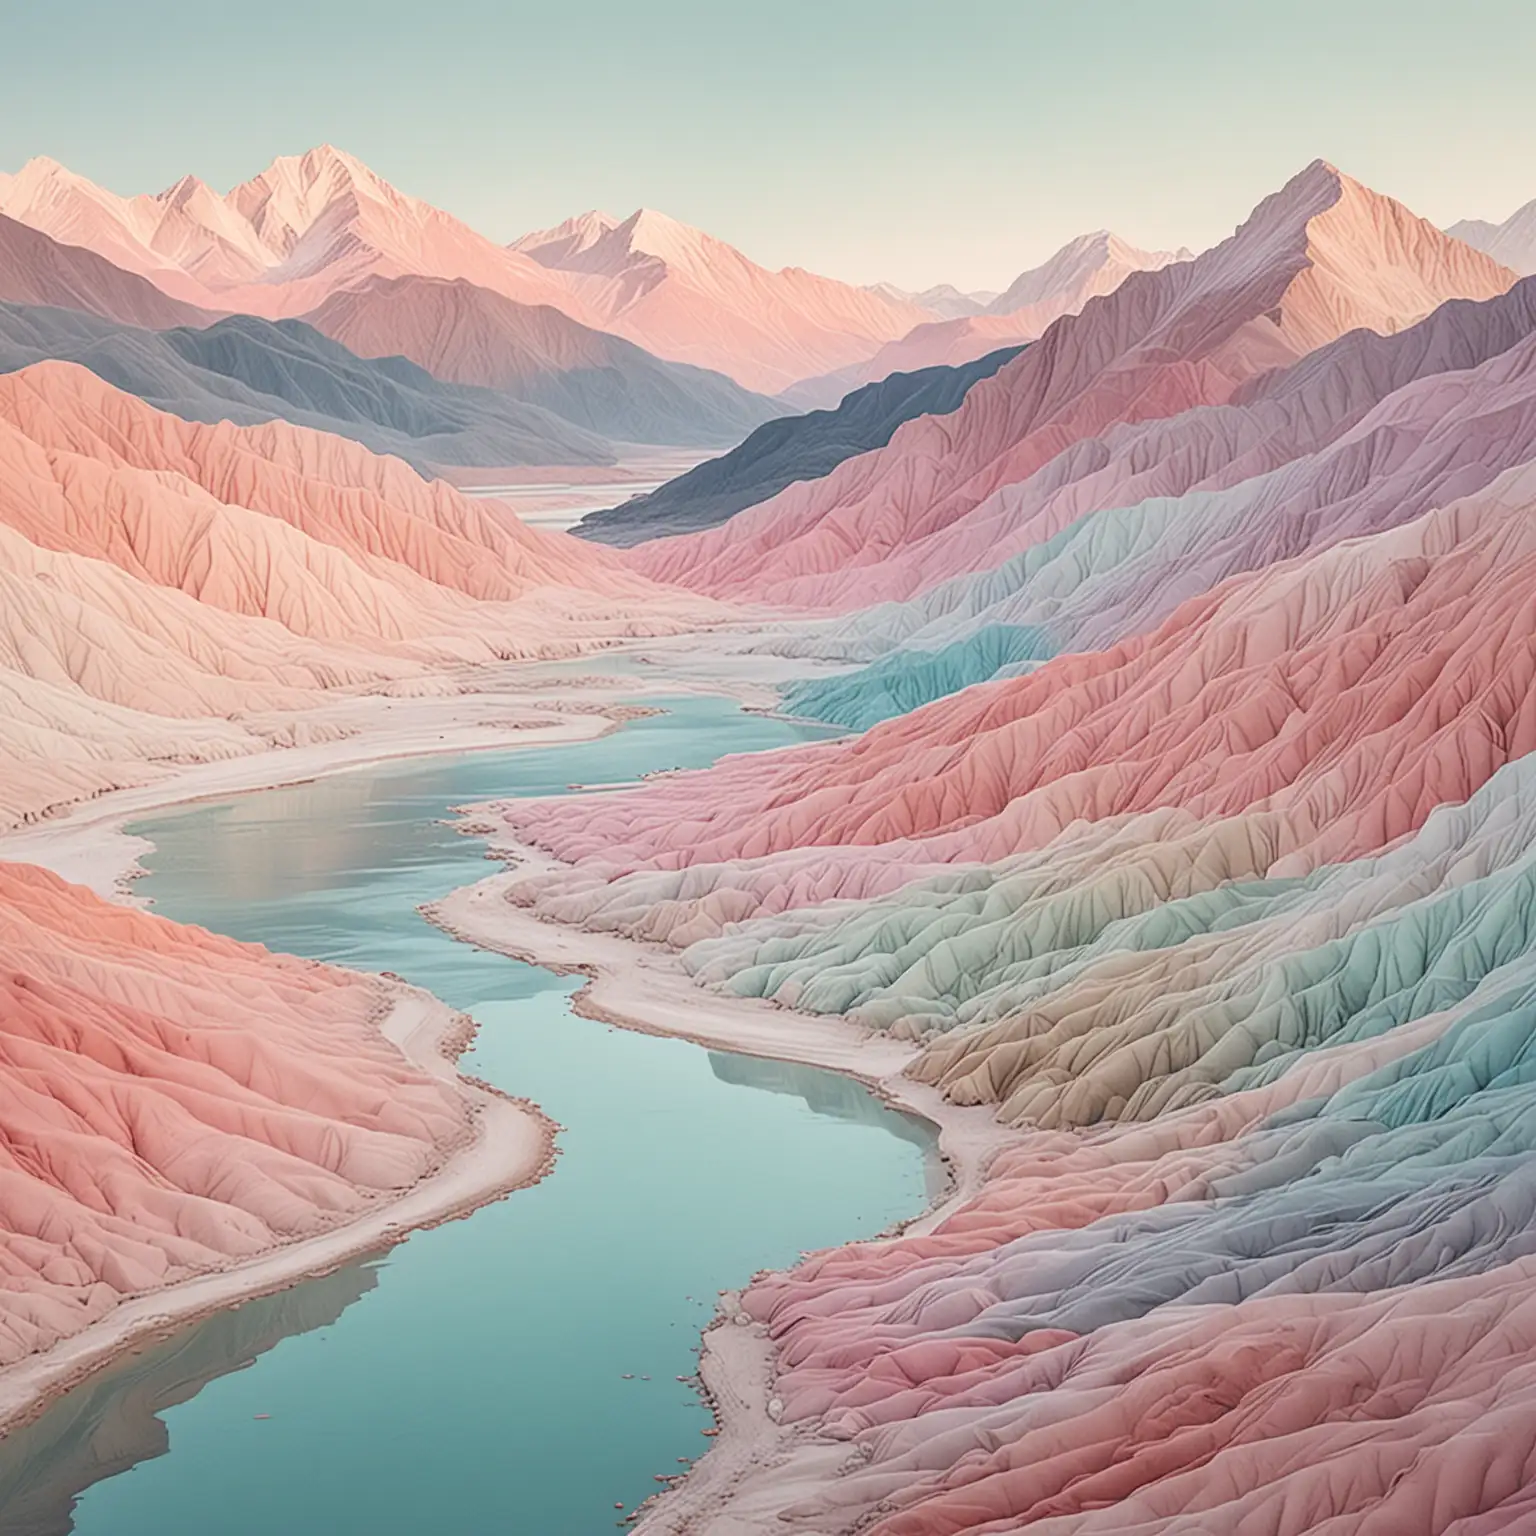 Serene Landscape with Pastel Color Round Mountains and Pale River